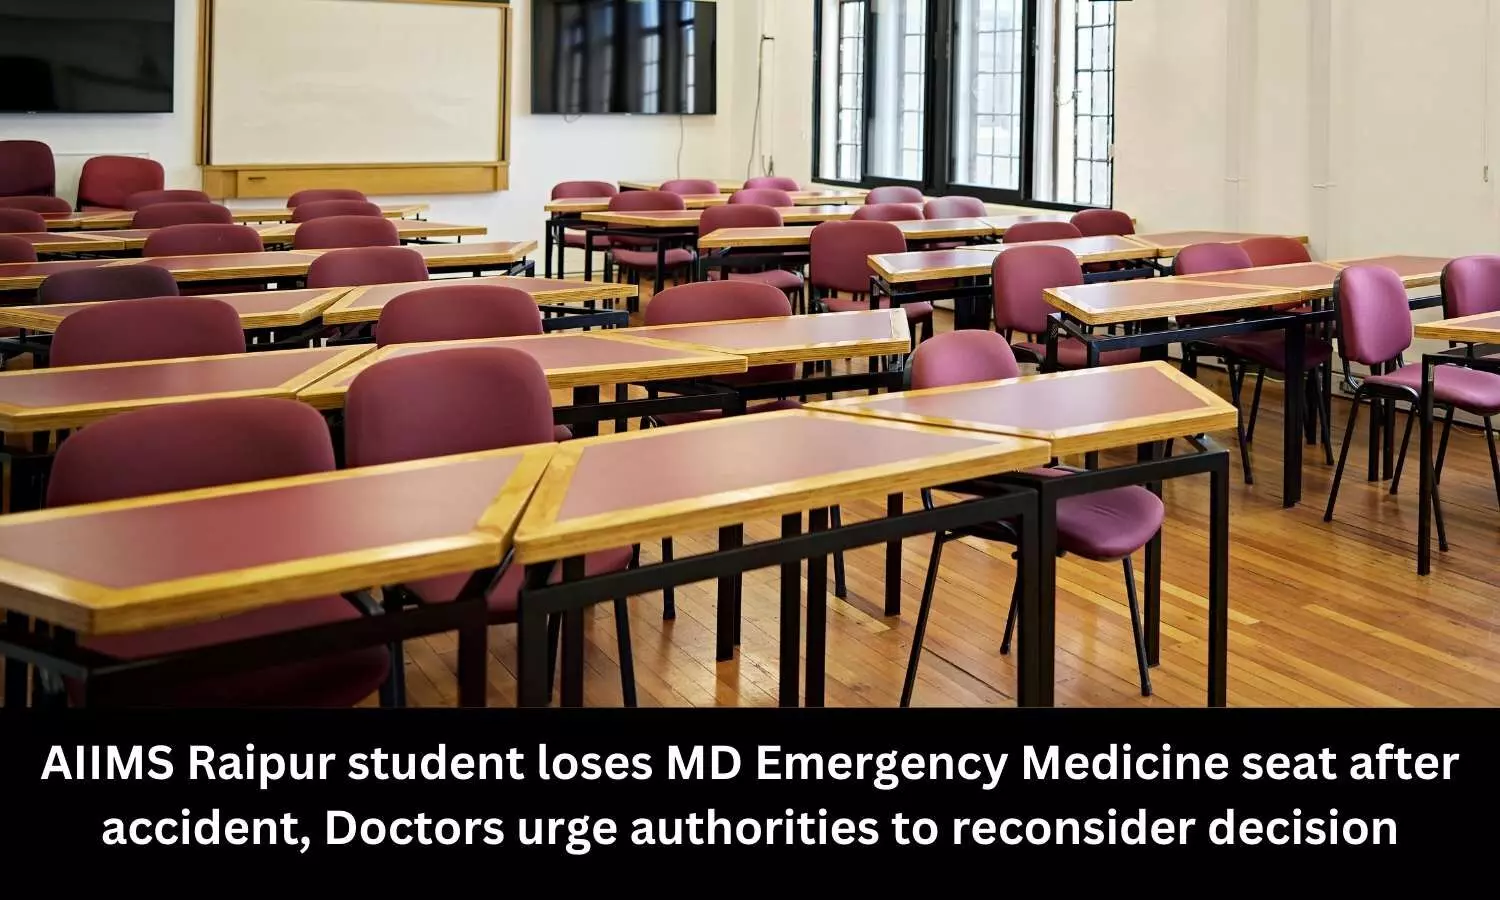 AIIMS Raipur student loses MD Emergency Medicine seat after accident, Doctors urge authorities to reconsider decision